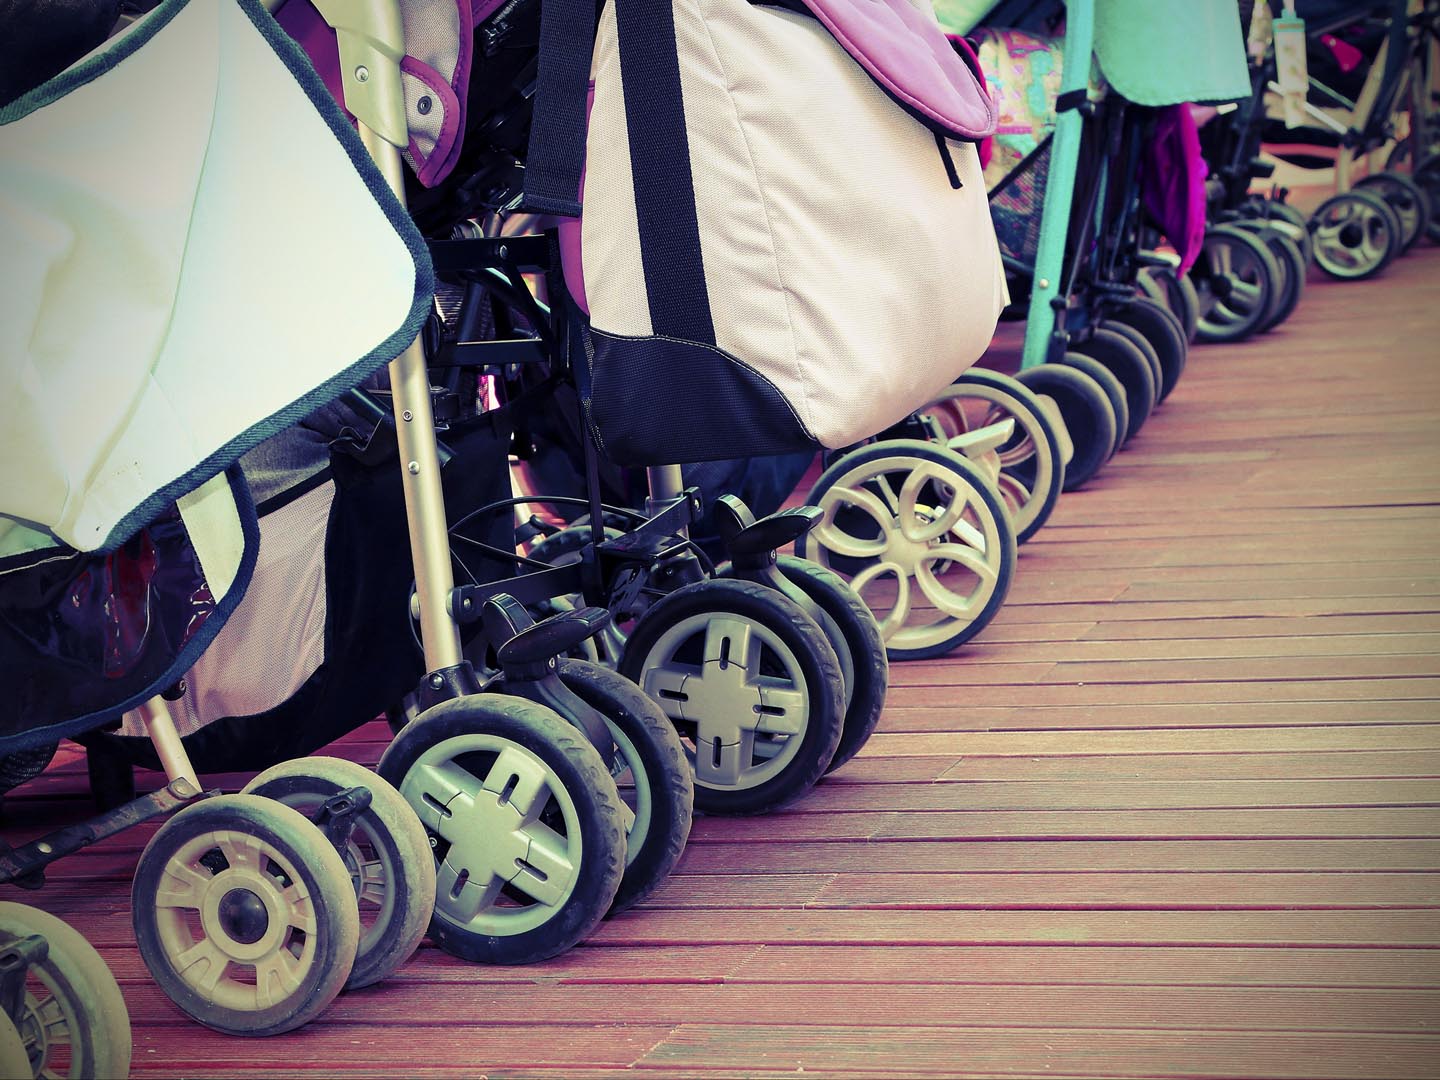 many strollers for toddlers parked on the parquet floor of wood